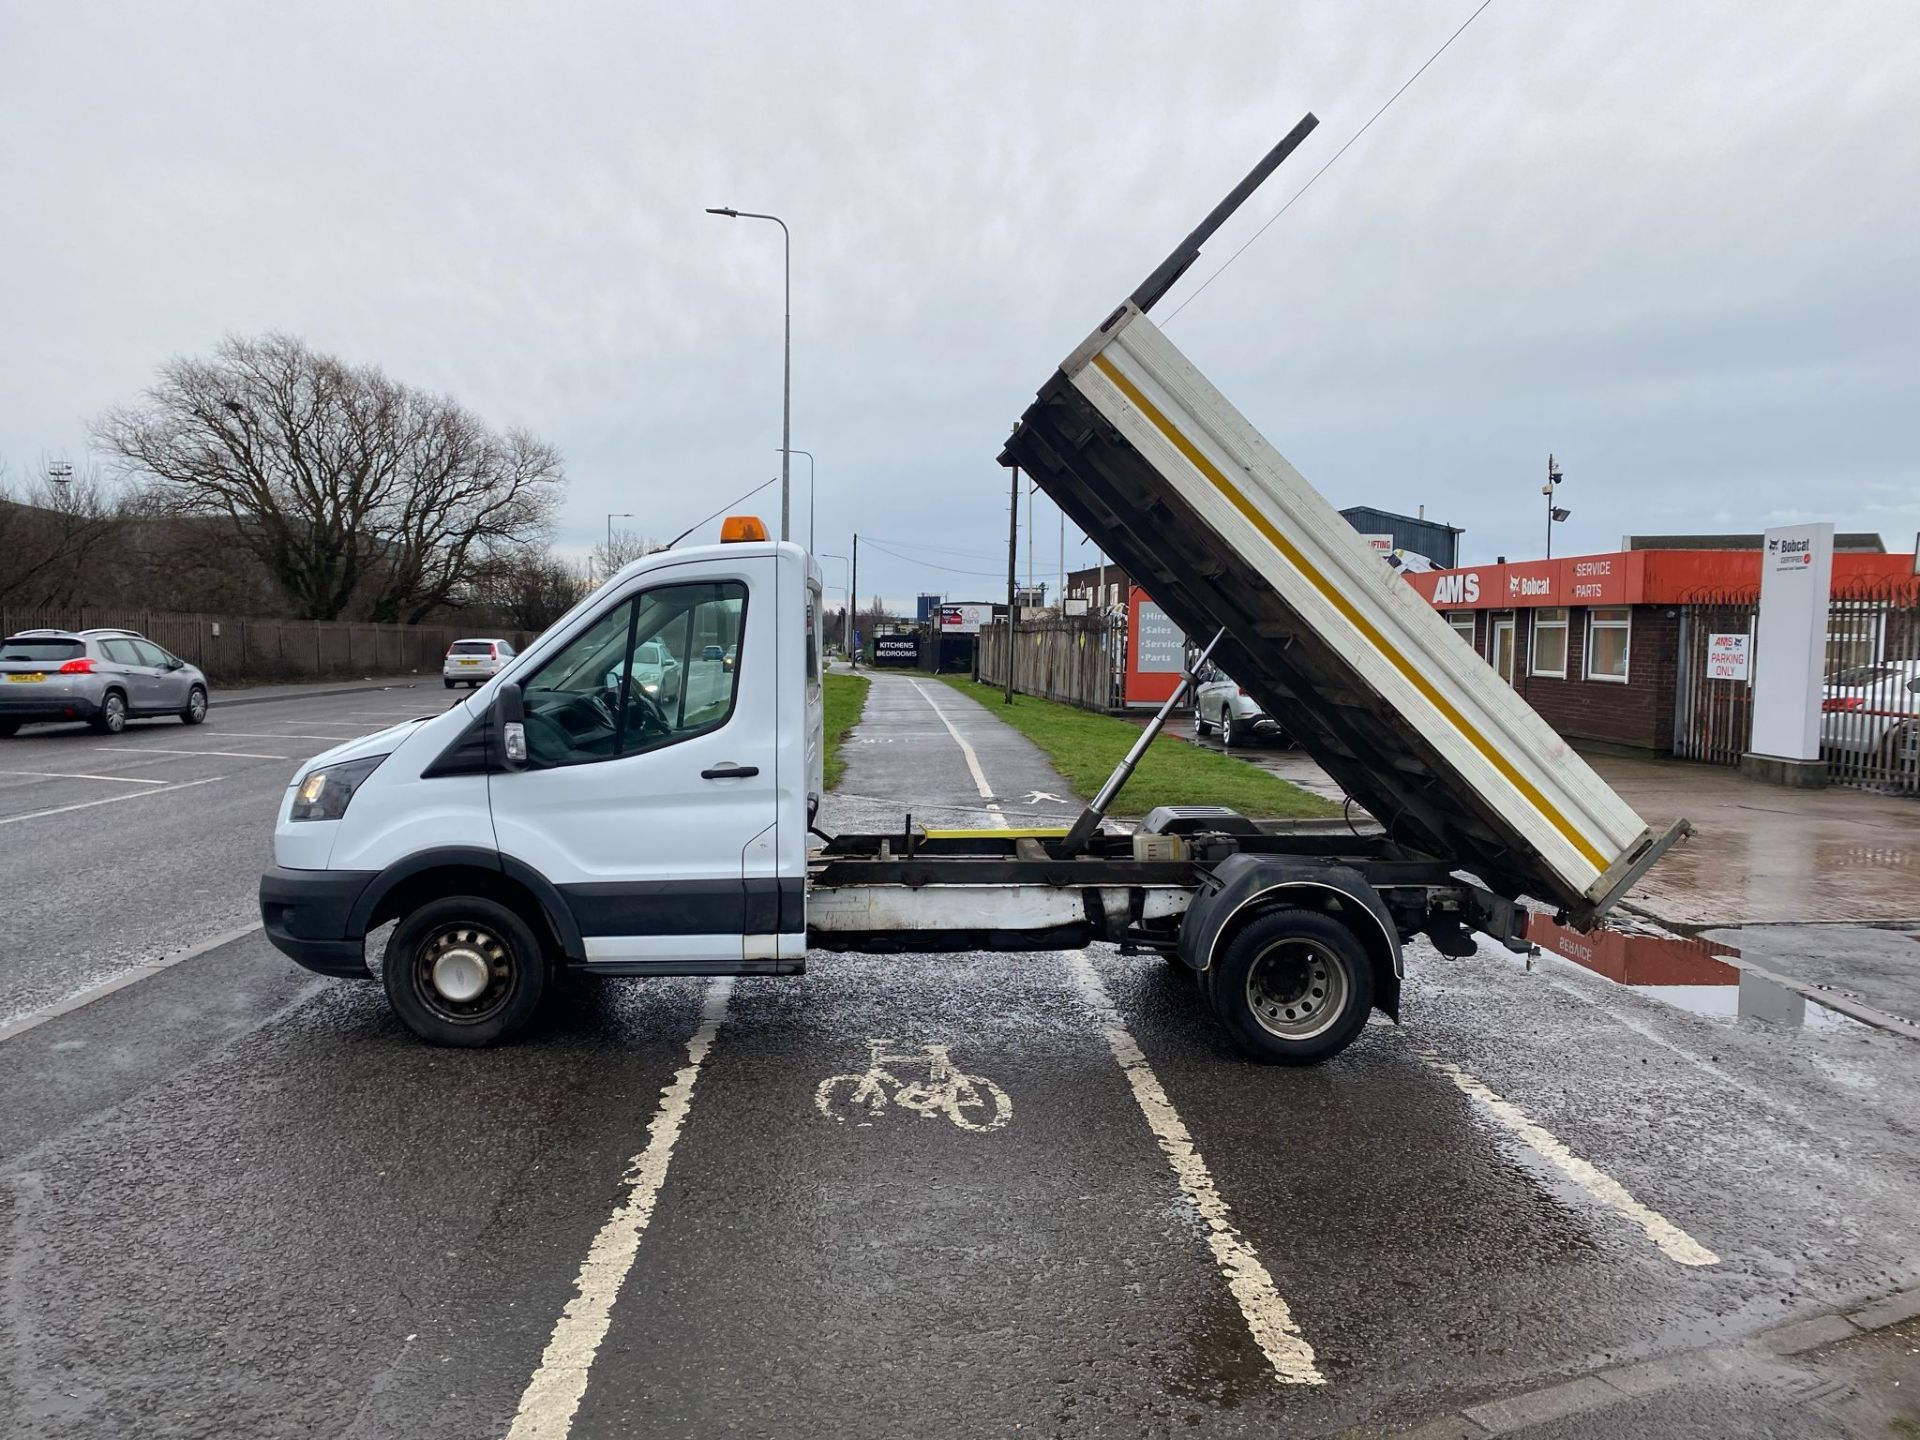 2018 18 FORD TRANSIT TIPPER - 135K MILES - EURO 6 - TWIN REAR WHEEL. - Image 2 of 10